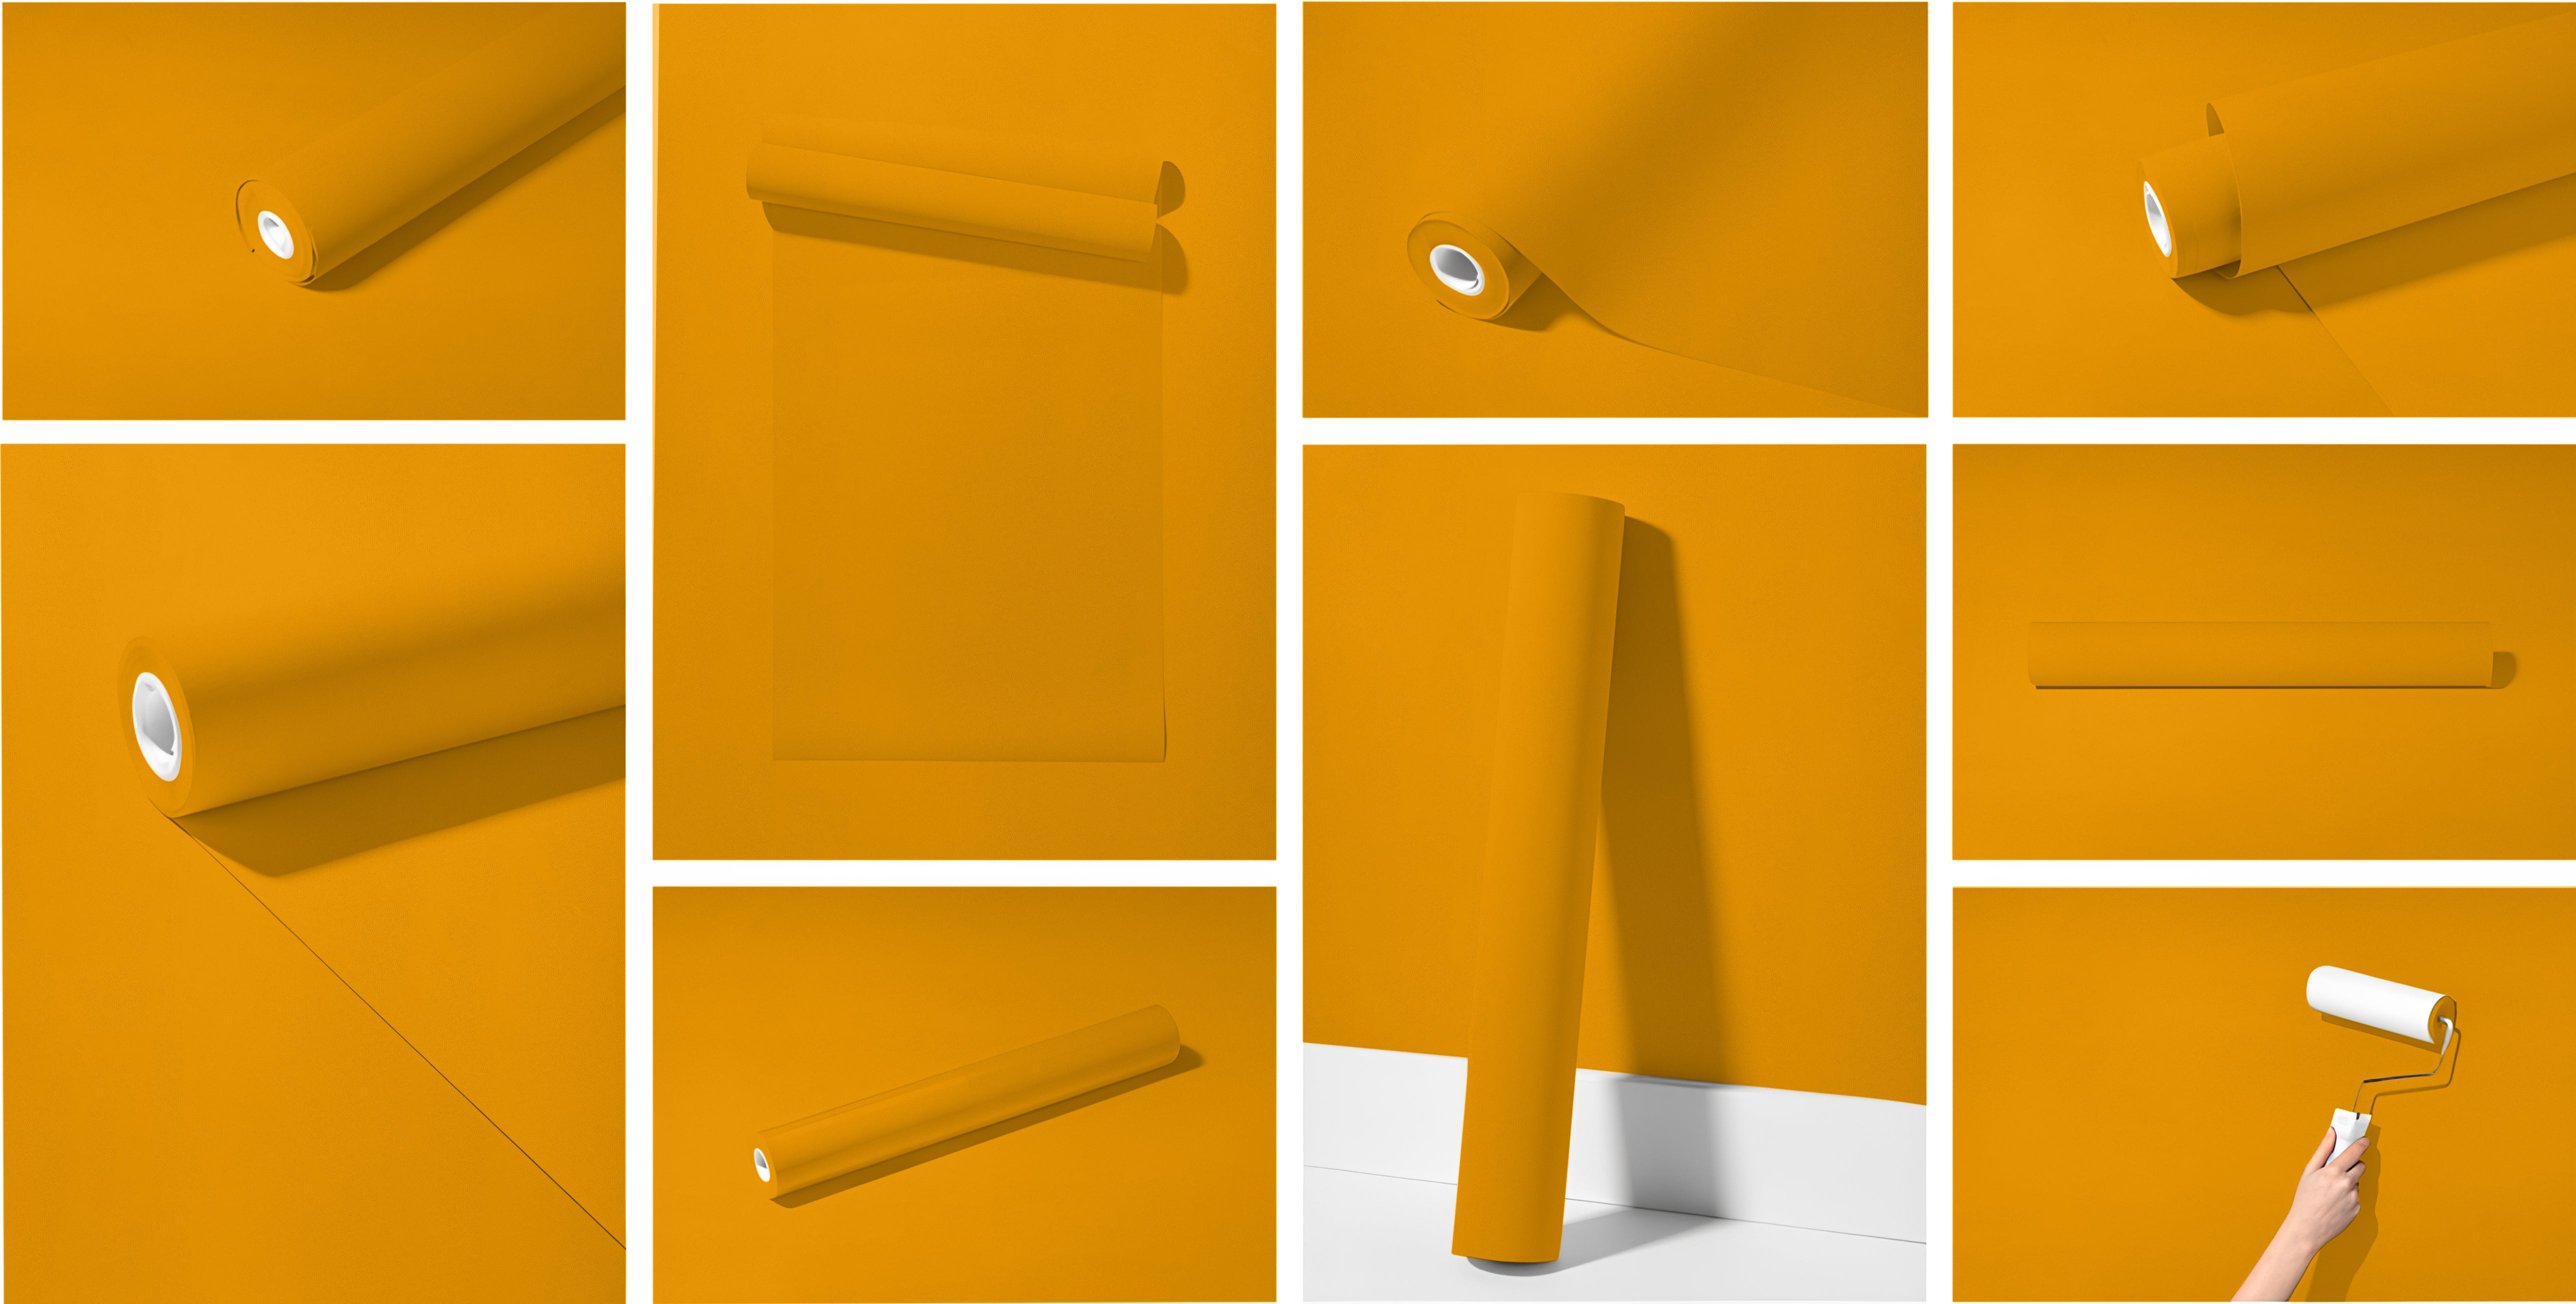 Peel & Stick Removable Re-usable Paint - Color RAL 1006 Maize Yellow - offRAL™ - RALRAW LLC, USA